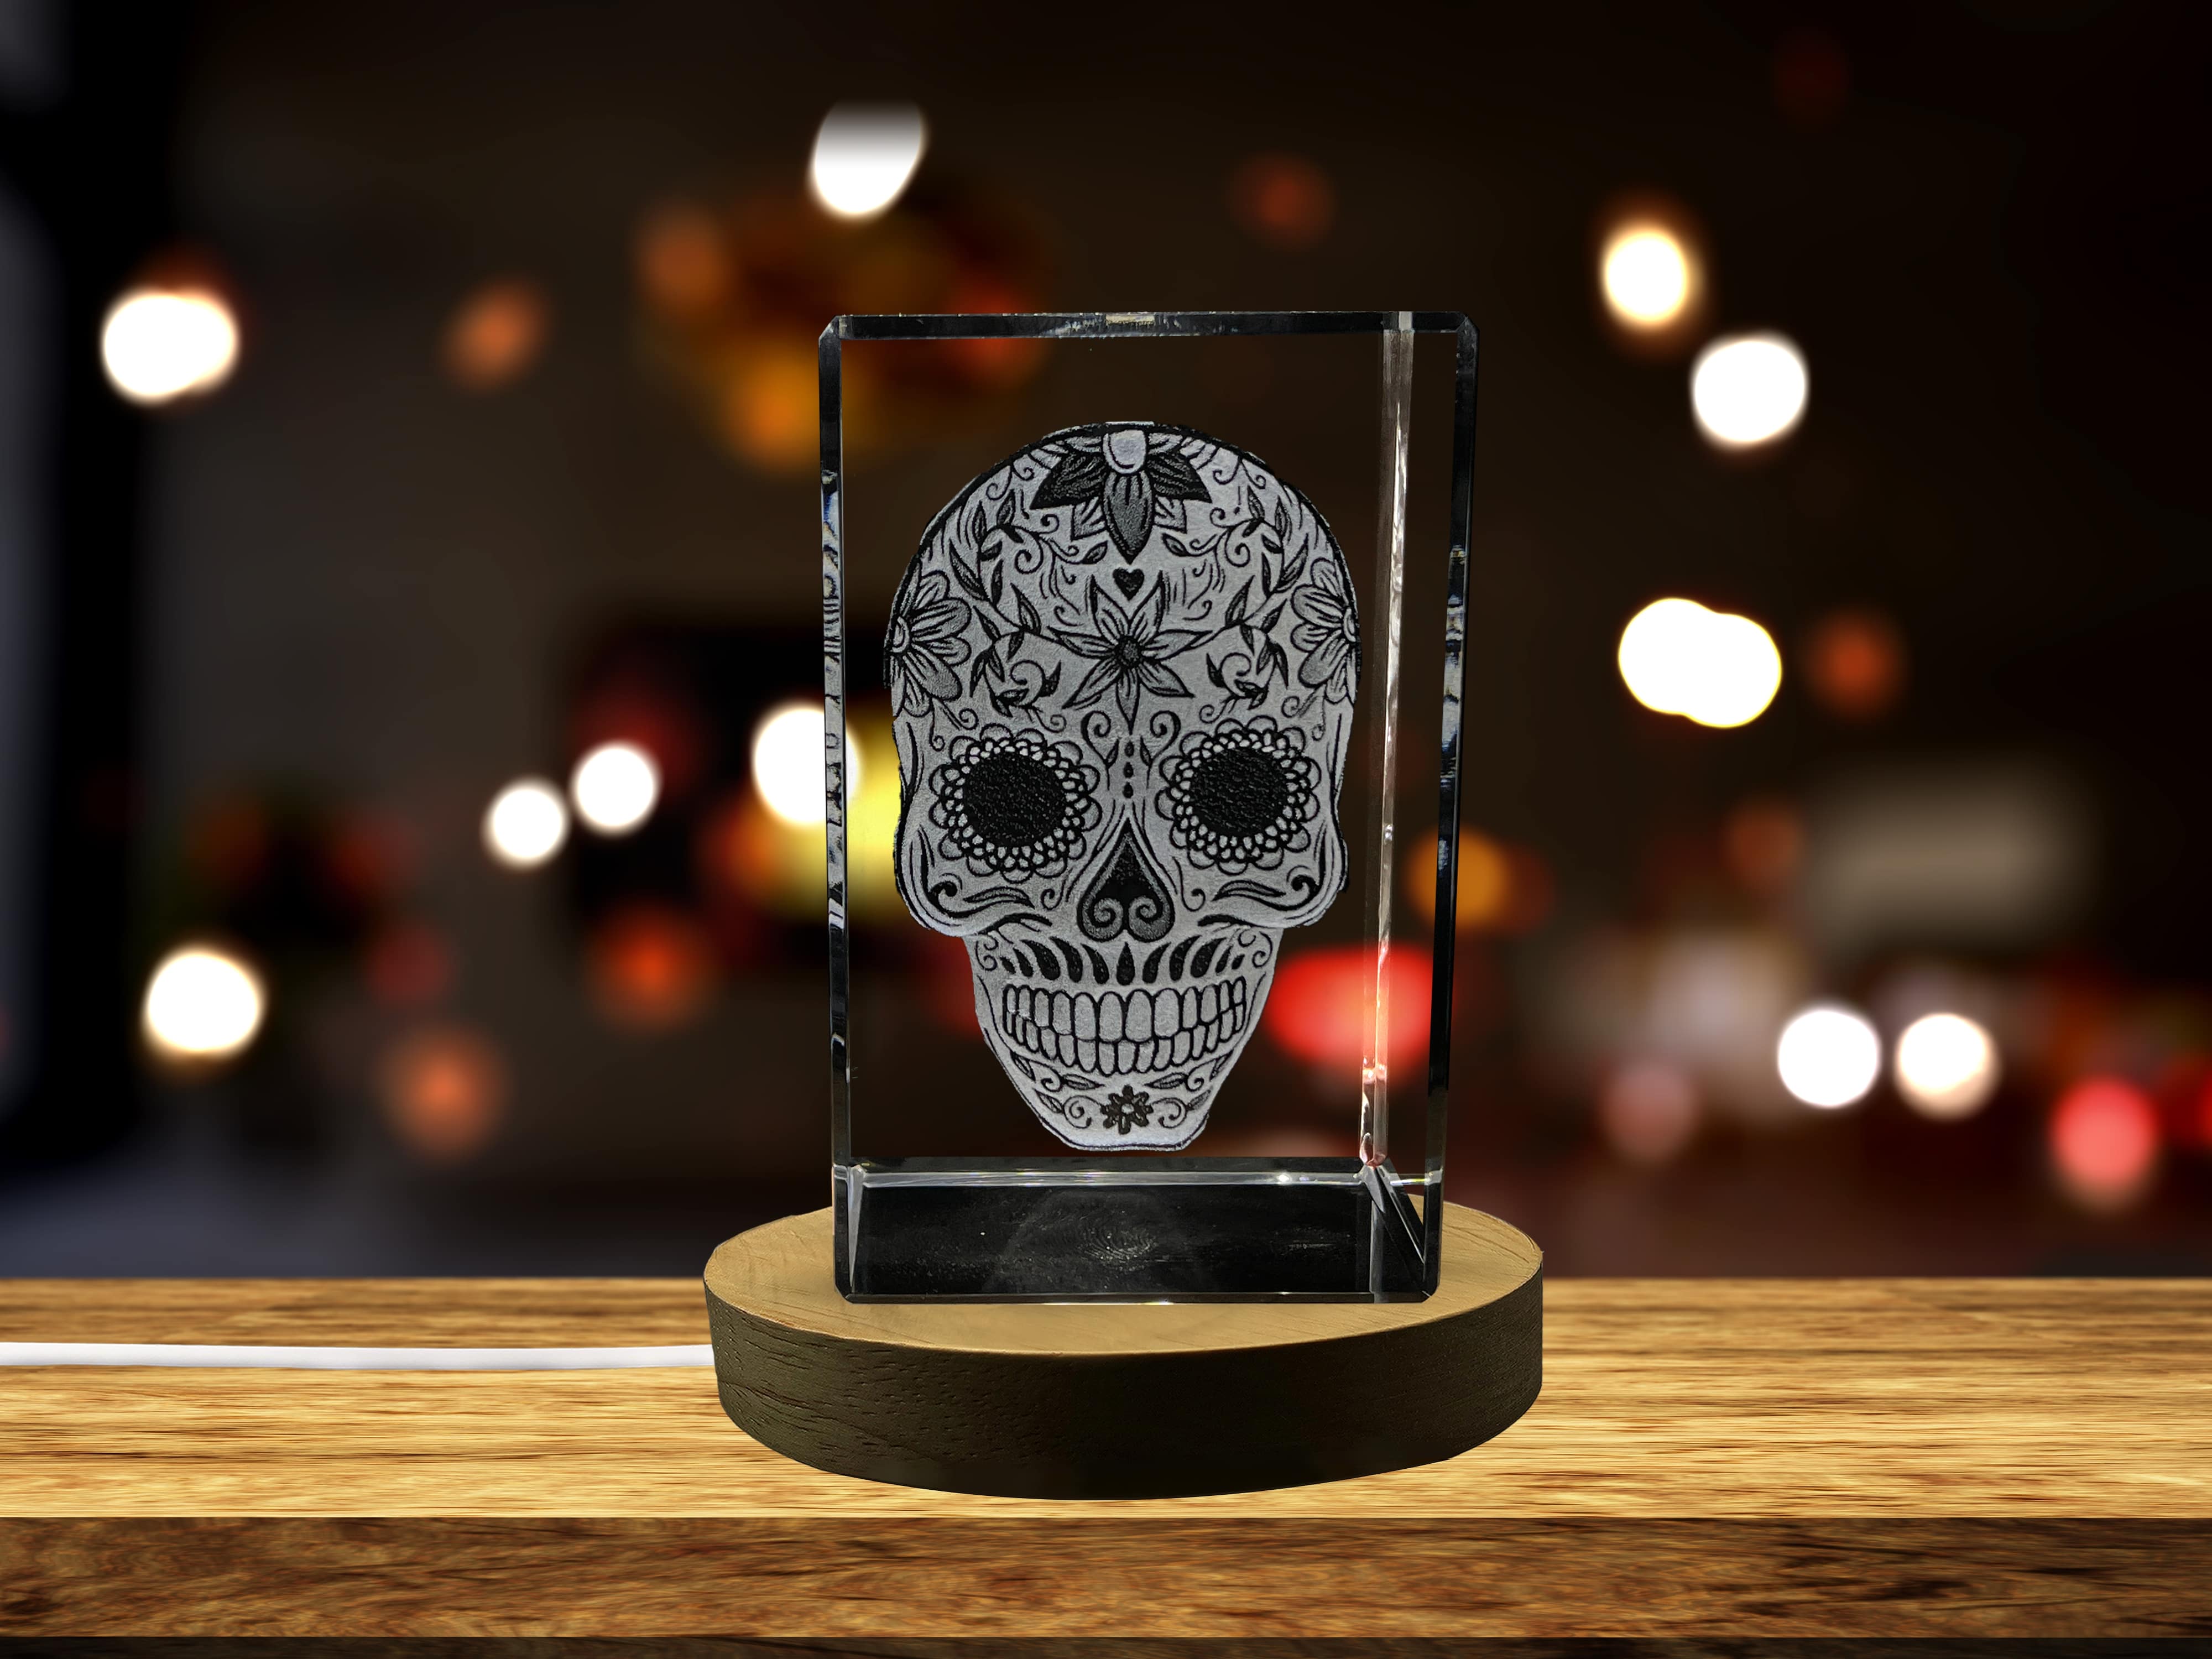 Mexican Skull 3D Engraved Crystal Decor with LED Base - Handcrafted Premium Quality Glass A&B Crystal Collection